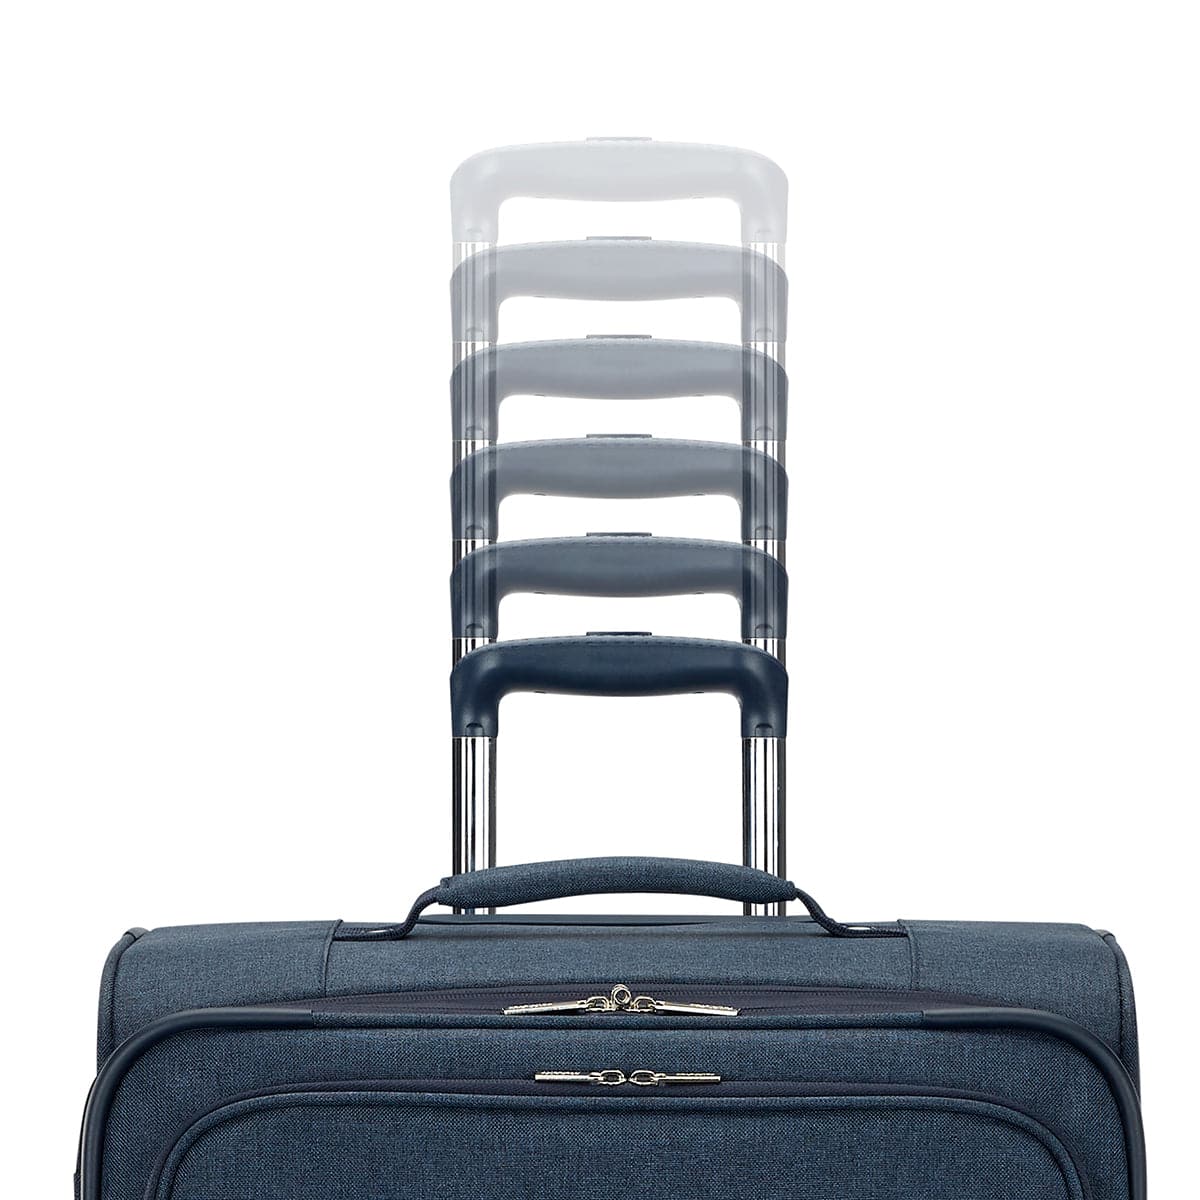 American Tourister Whim 21" Spinner